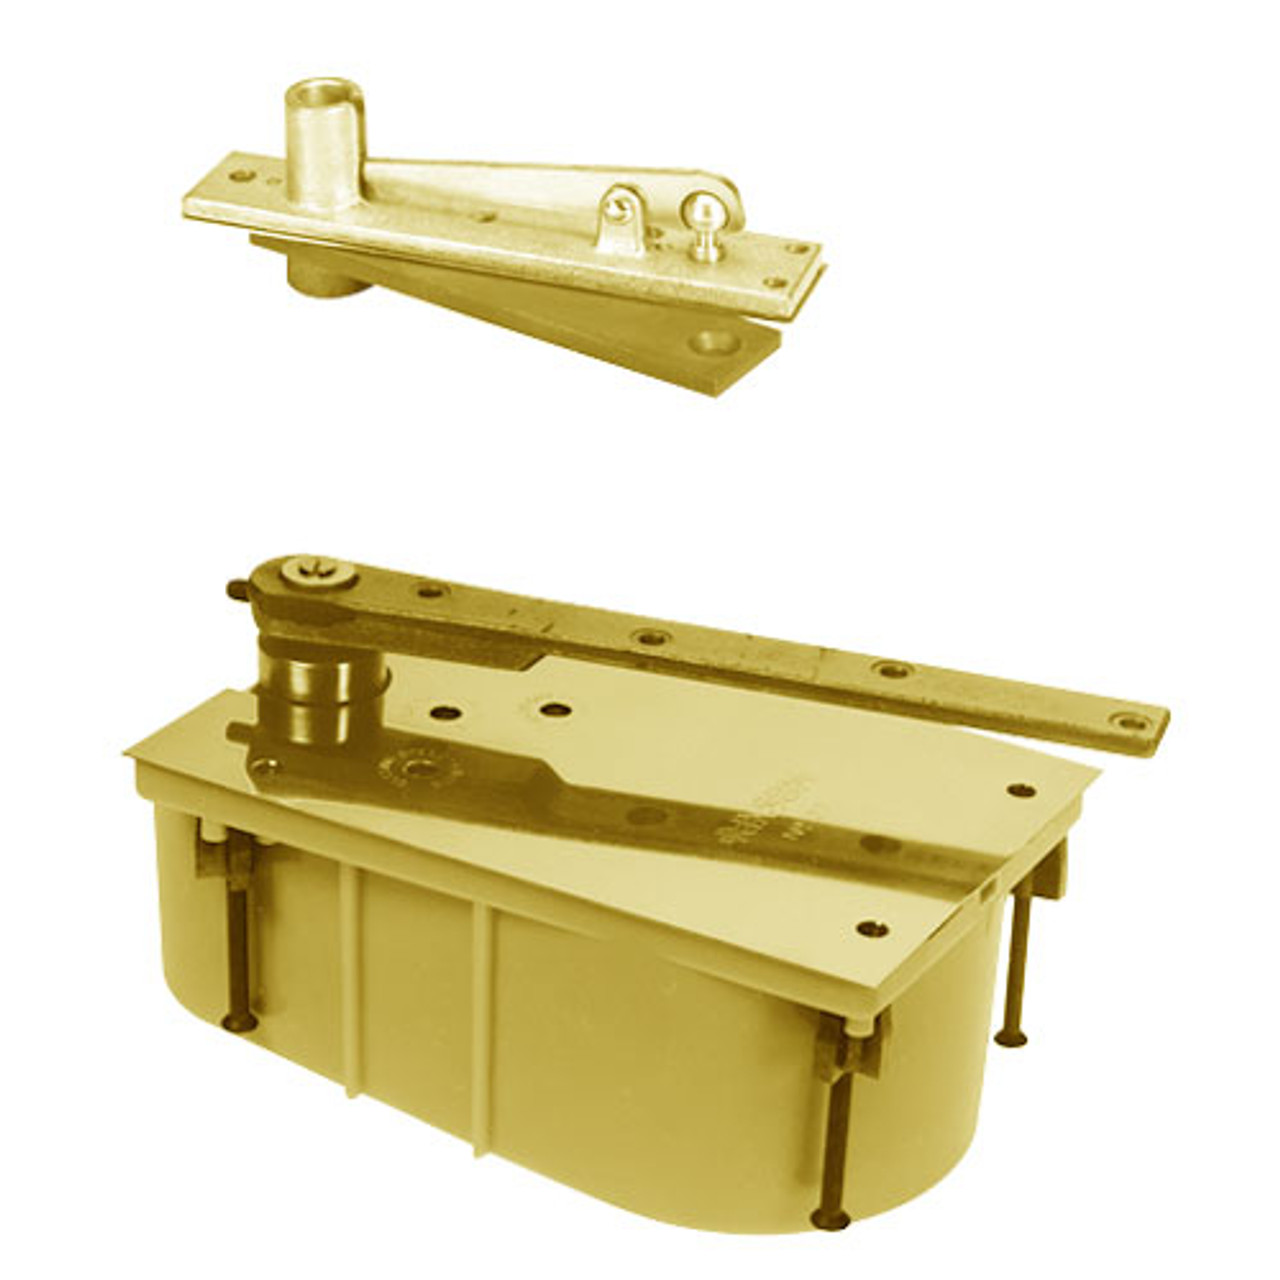 SC28-95S-554-RH-605 Rixson 28 Series Heavy Duty Single Acting Center Hung Floor Closer with Concealed Arm in Bright Brass Finish